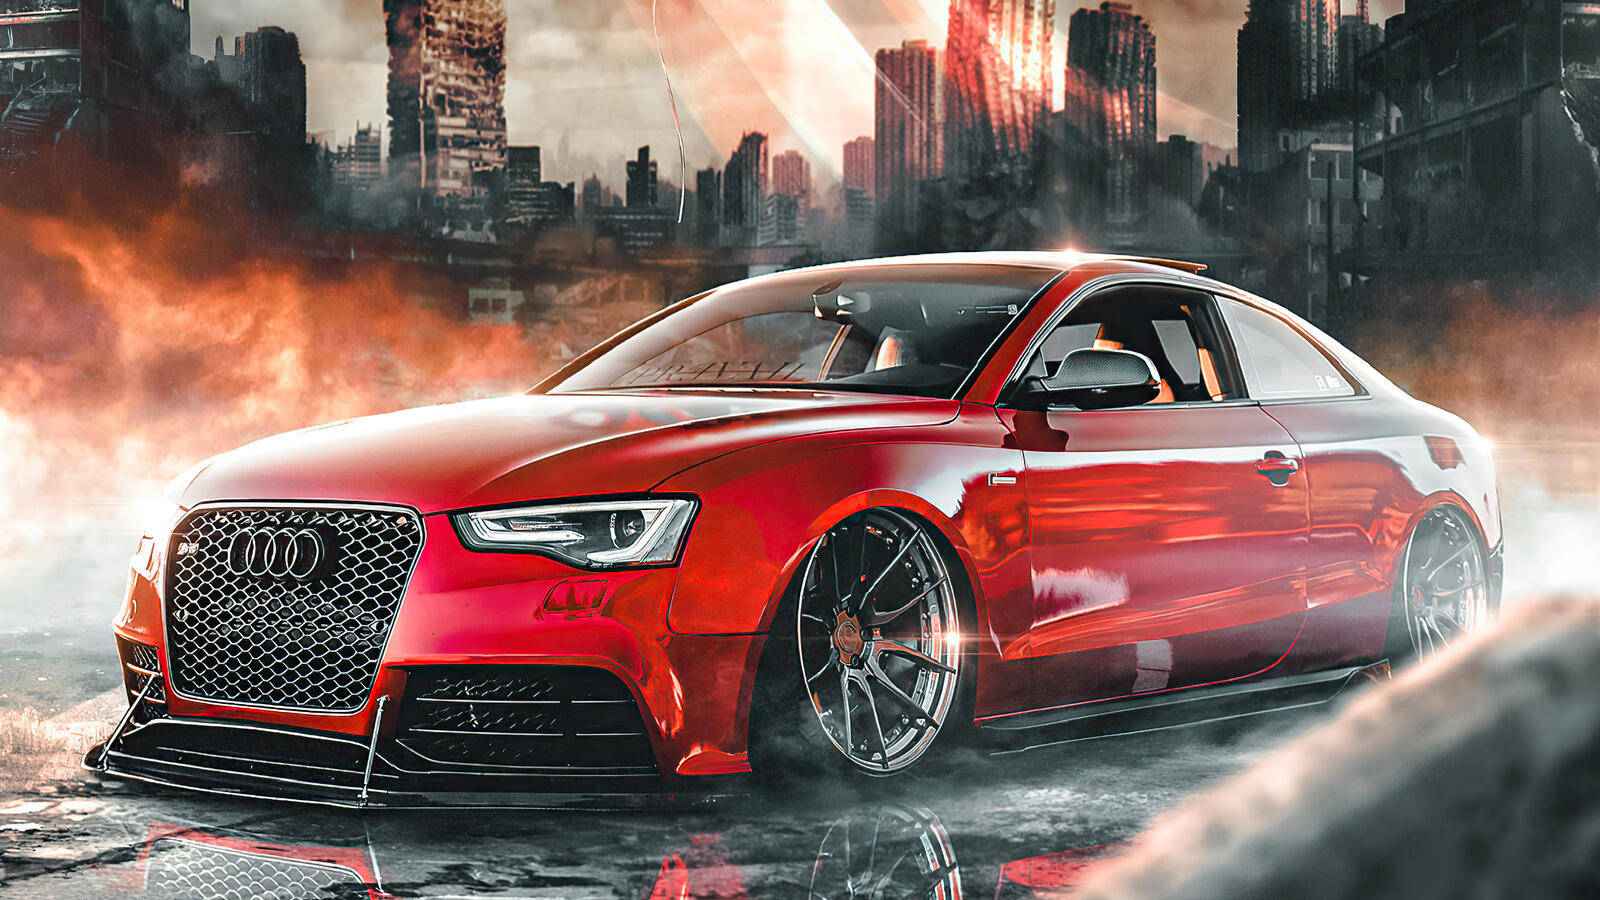 Free photo Picture of a tuned Audi Rs5 in red with cool rims